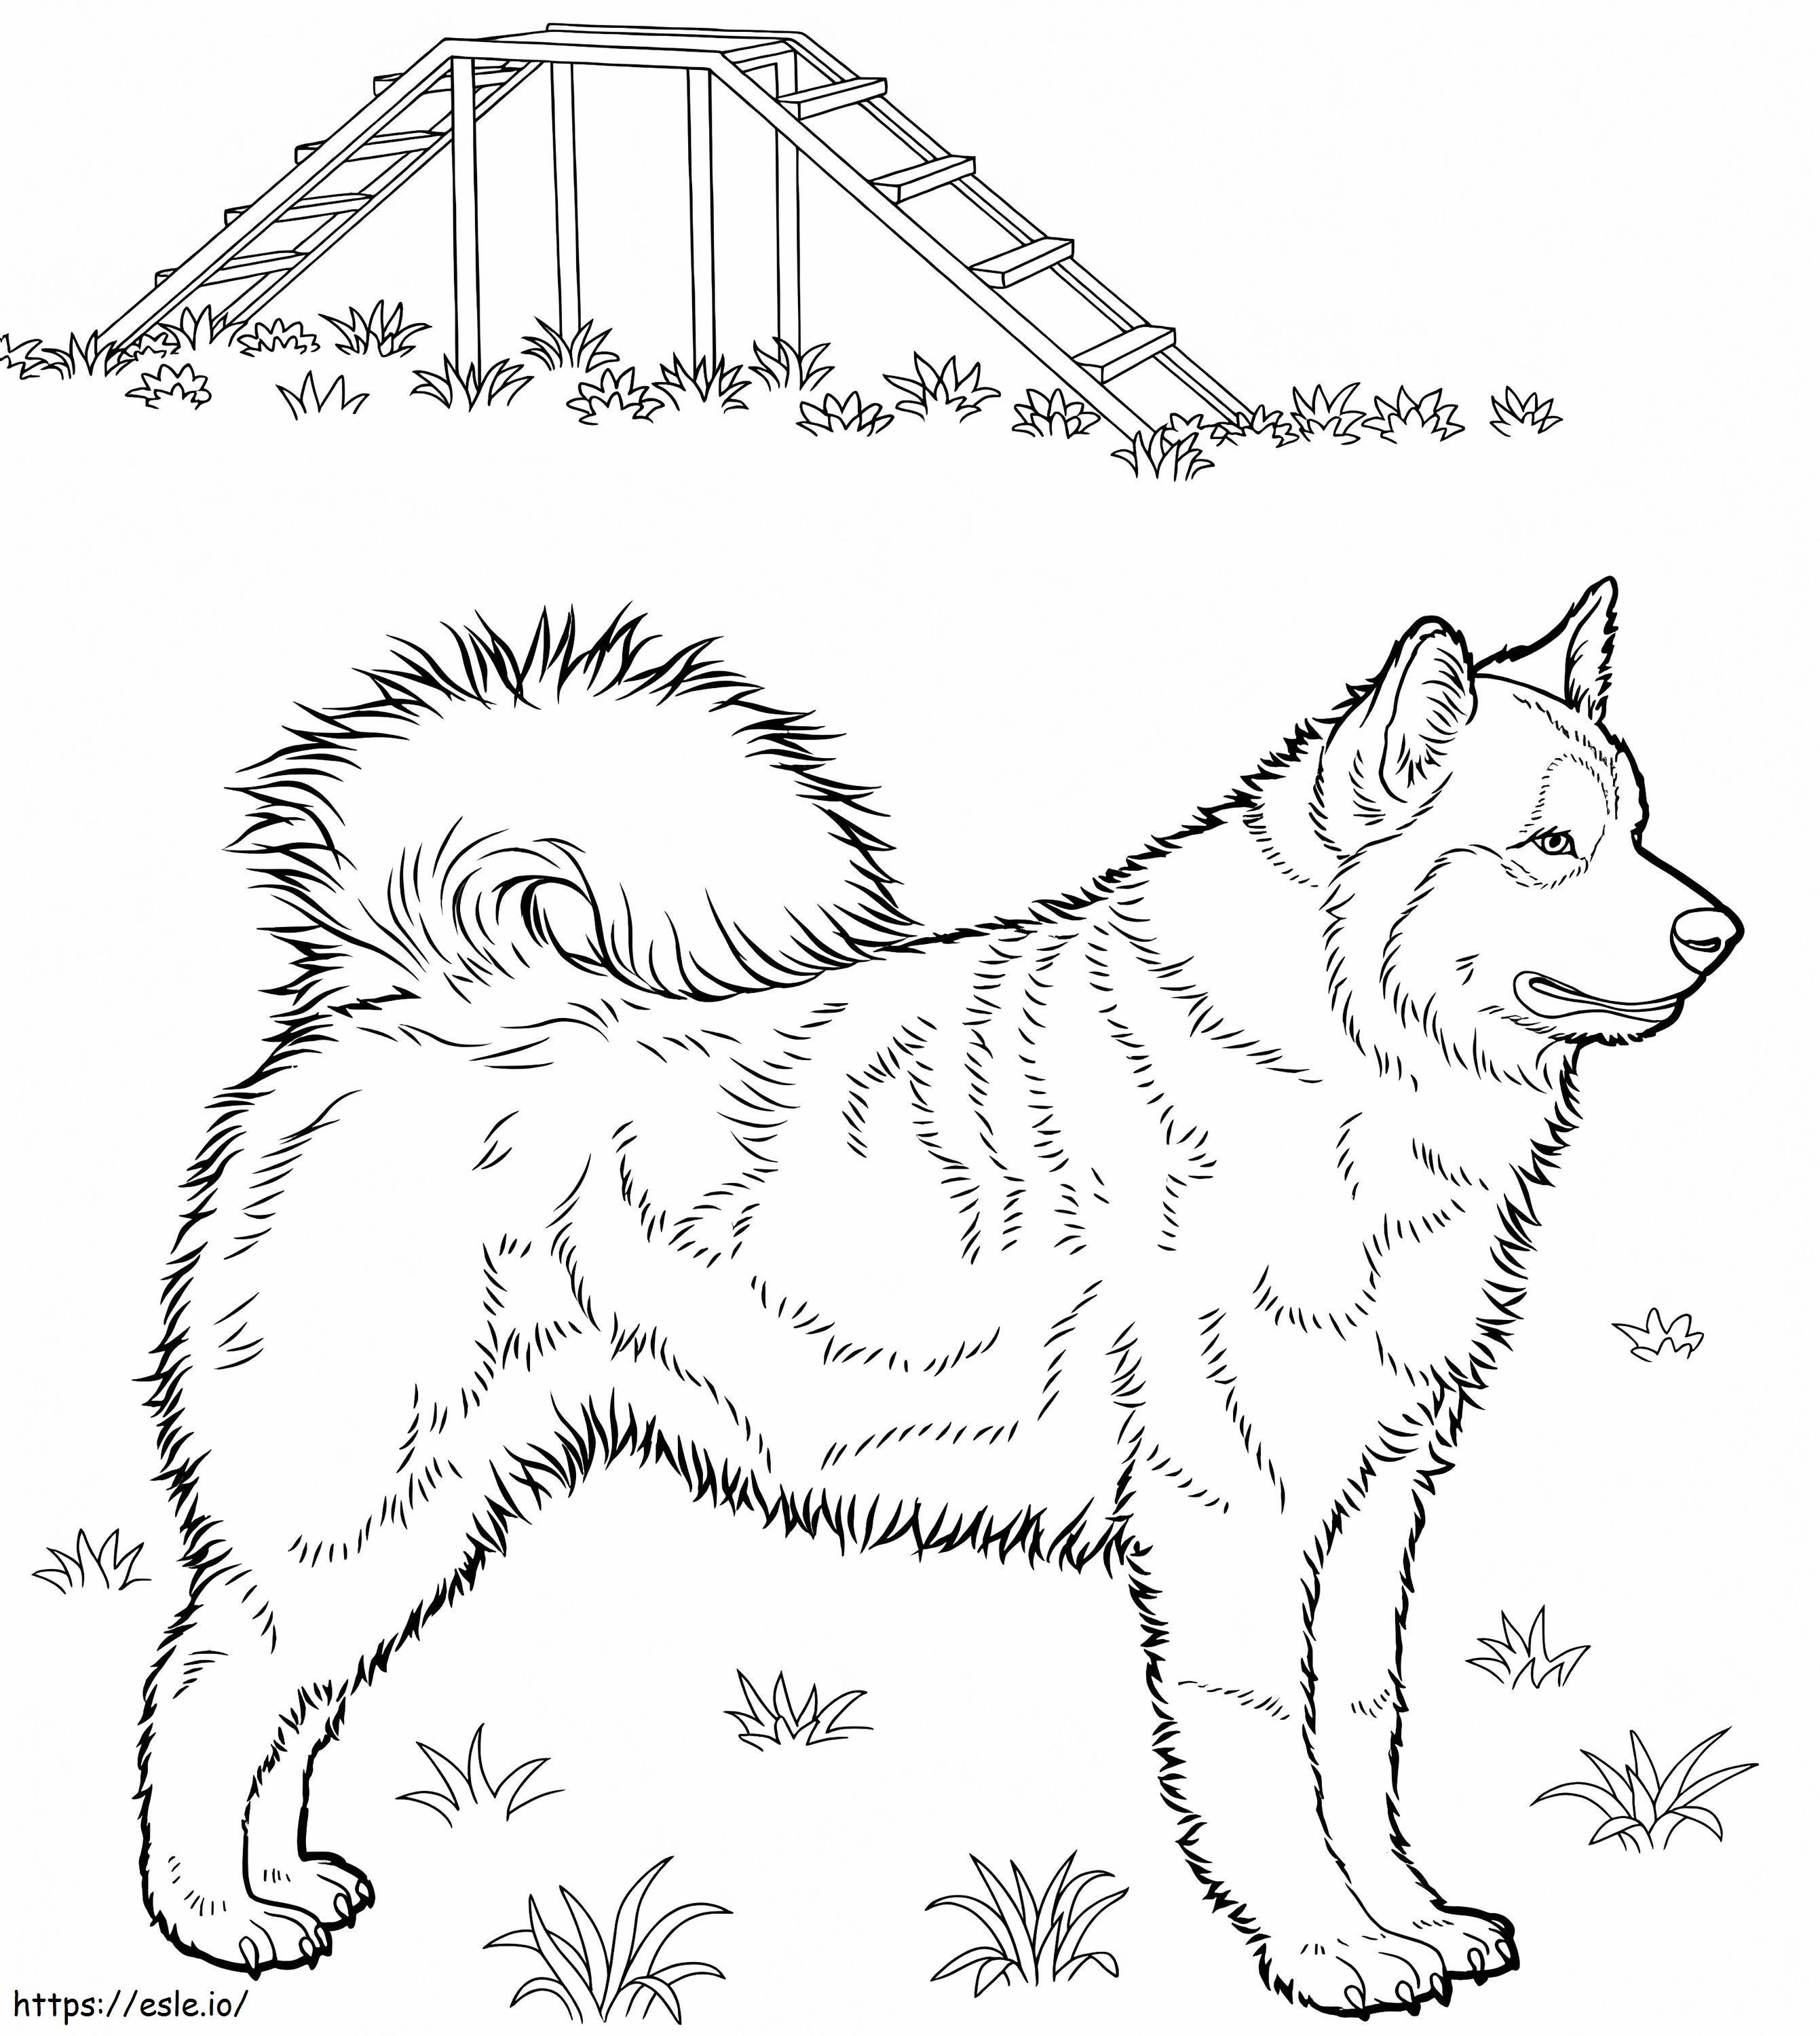 Husky coloring page